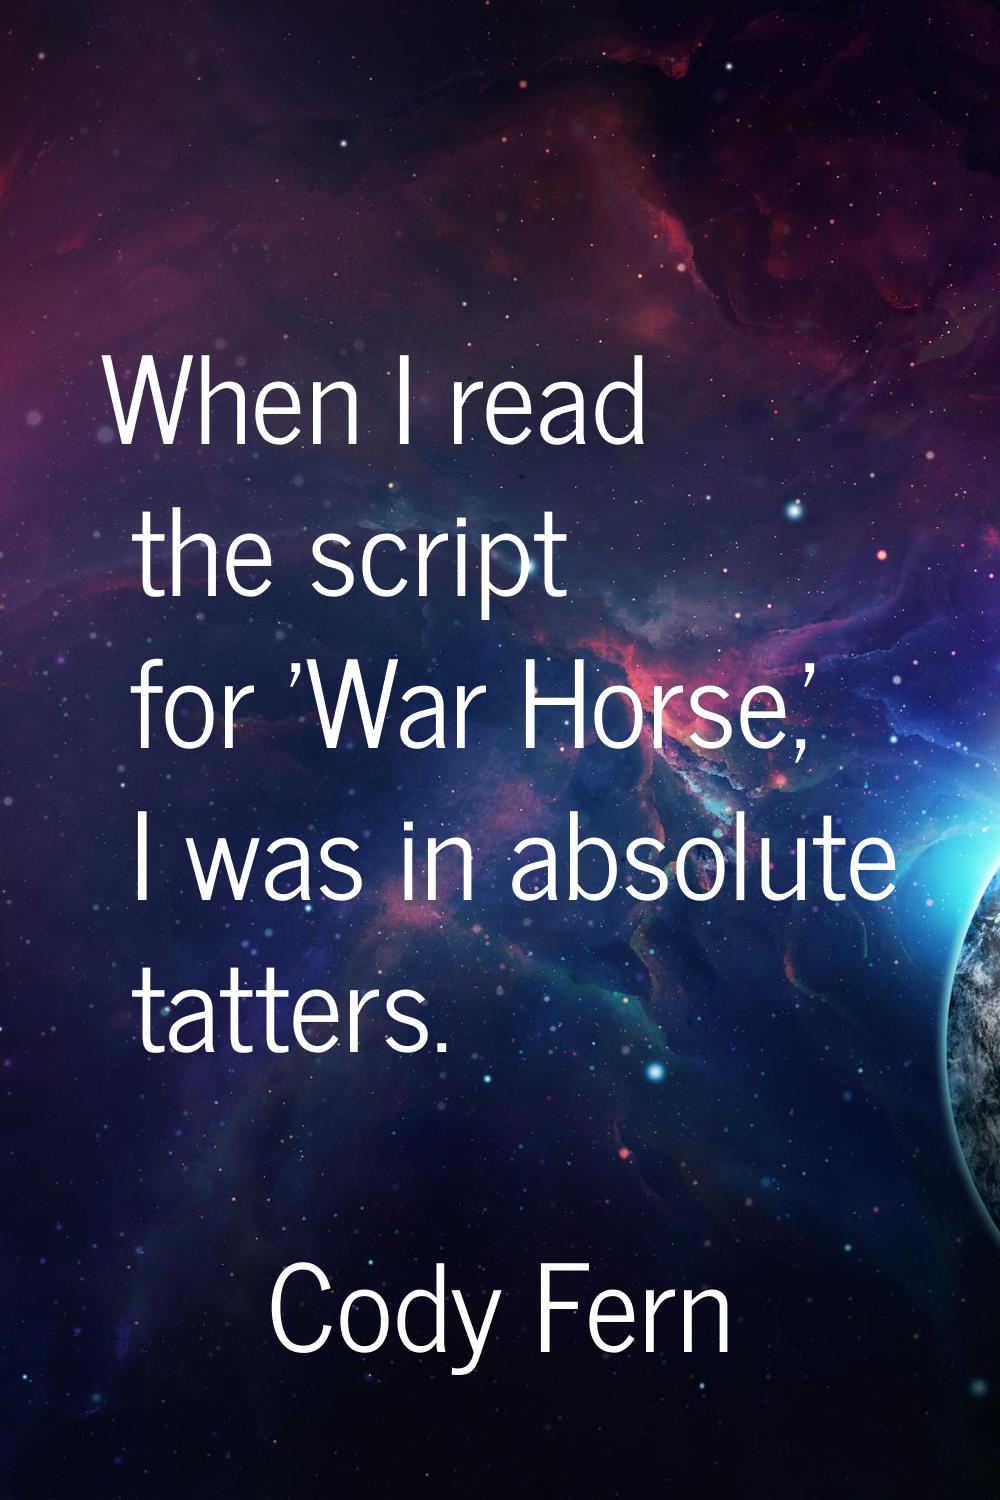 When I read the script for 'War Horse,' I was in absolute tatters.